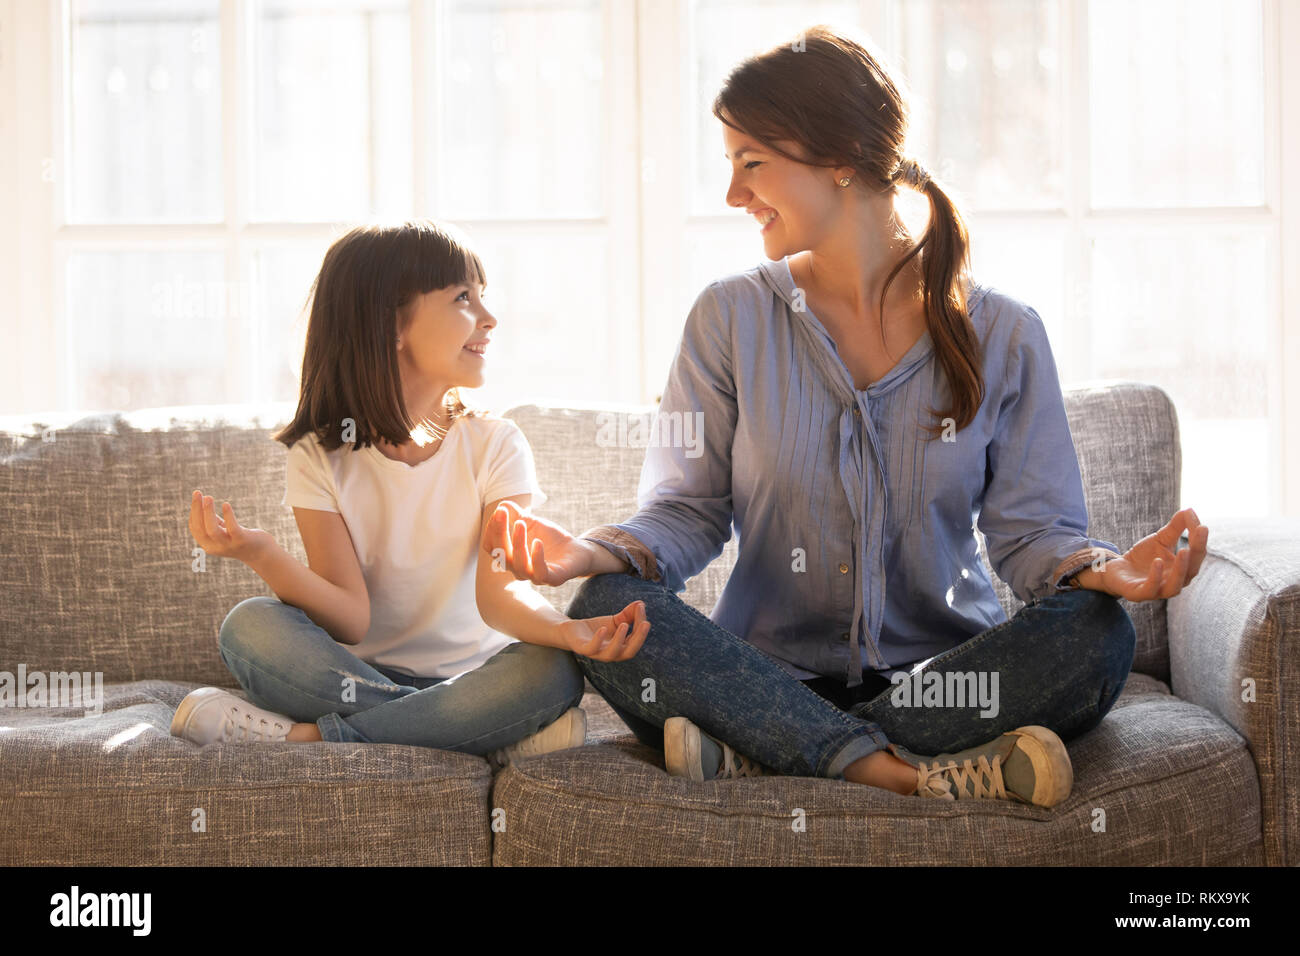 Mindful mom teaching yoga happy child daughter sitting on couch Stock Photo